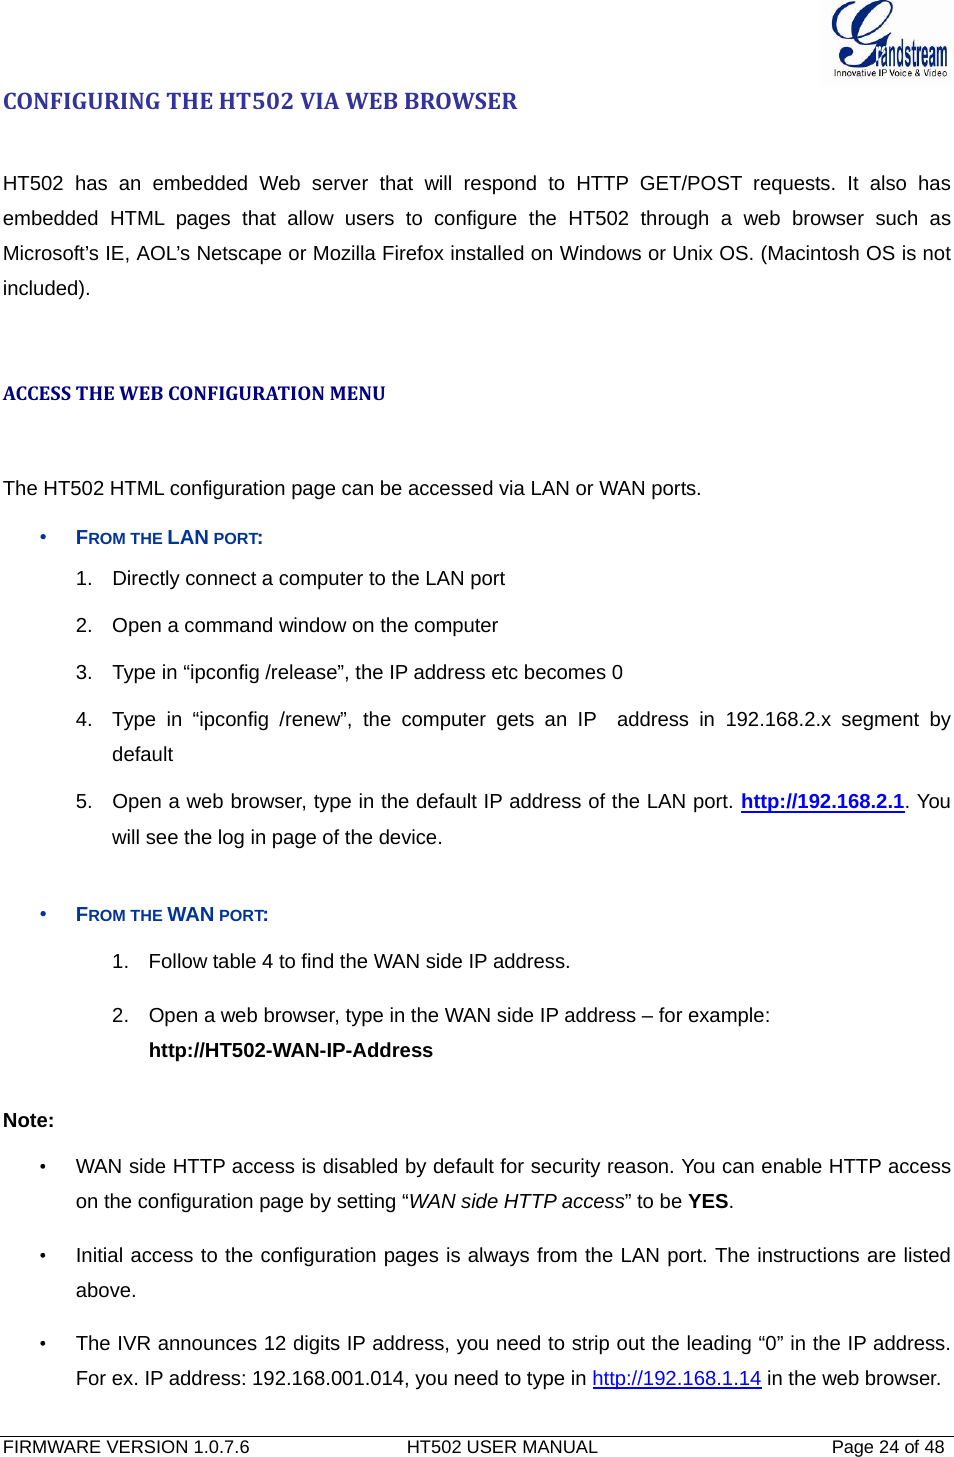  FIRMWARE VERSION 1.0.7.6                               HT502 USER MANUAL                                              Page 24 of 48   CONFIGURINGTHEHT502VIAWEBBROWSERHT502 has an embedded Web server that will respond to HTTP GET/POST requests. It also has embedded HTML pages that allow users to configure the HT502 through a web browser such as Microsoft’s IE, AOL’s Netscape or Mozilla Firefox installed on Windows or Unix OS. (Macintosh OS is not included).   ACCESSTHEWEBCONFIGURATIONMENUThe HT502 HTML configuration page can be accessed via LAN or WAN ports. • FROM THE LAN PORT: 1.  Directly connect a computer to the LAN port  2.  Open a command window on the computer 3.  Type in “ipconfig /release”, the IP address etc becomes 0 4.  Type in “ipconfig /renew”, the computer gets an IP  address in 192.168.2.x segment by default 5.  Open a web browser, type in the default IP address of the LAN port. http://192.168.2.1. You will see the log in page of the device.   • FROM THE WAN PORT: 1.  Follow table 4 to find the WAN side IP address. 2.  Open a web browser, type in the WAN side IP address – for example: http://HT502-WAN-IP-Address  Note:   •  WAN side HTTP access is disabled by default for security reason. You can enable HTTP access on the configuration page by setting “WAN side HTTP access” to be YES.  •  Initial access to the configuration pages is always from the LAN port. The instructions are listed above. •  The IVR announces 12 digits IP address, you need to strip out the leading “0” in the IP address. For ex. IP address: 192.168.001.014, you need to type in http://192.168.1.14 in the web browser.   